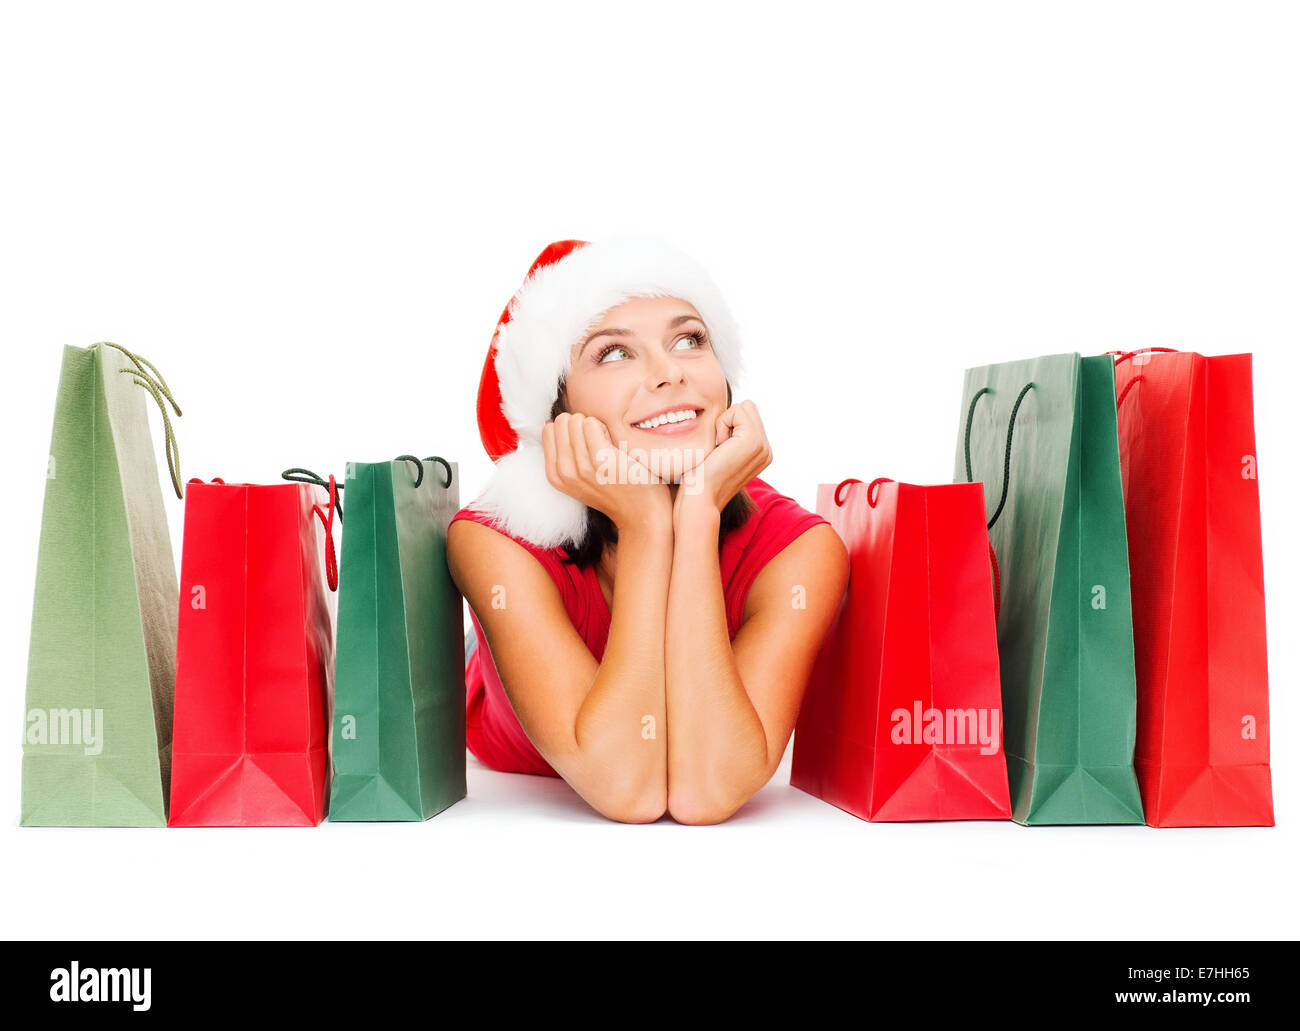 woman in red shirt with shopping bags Stock Photo